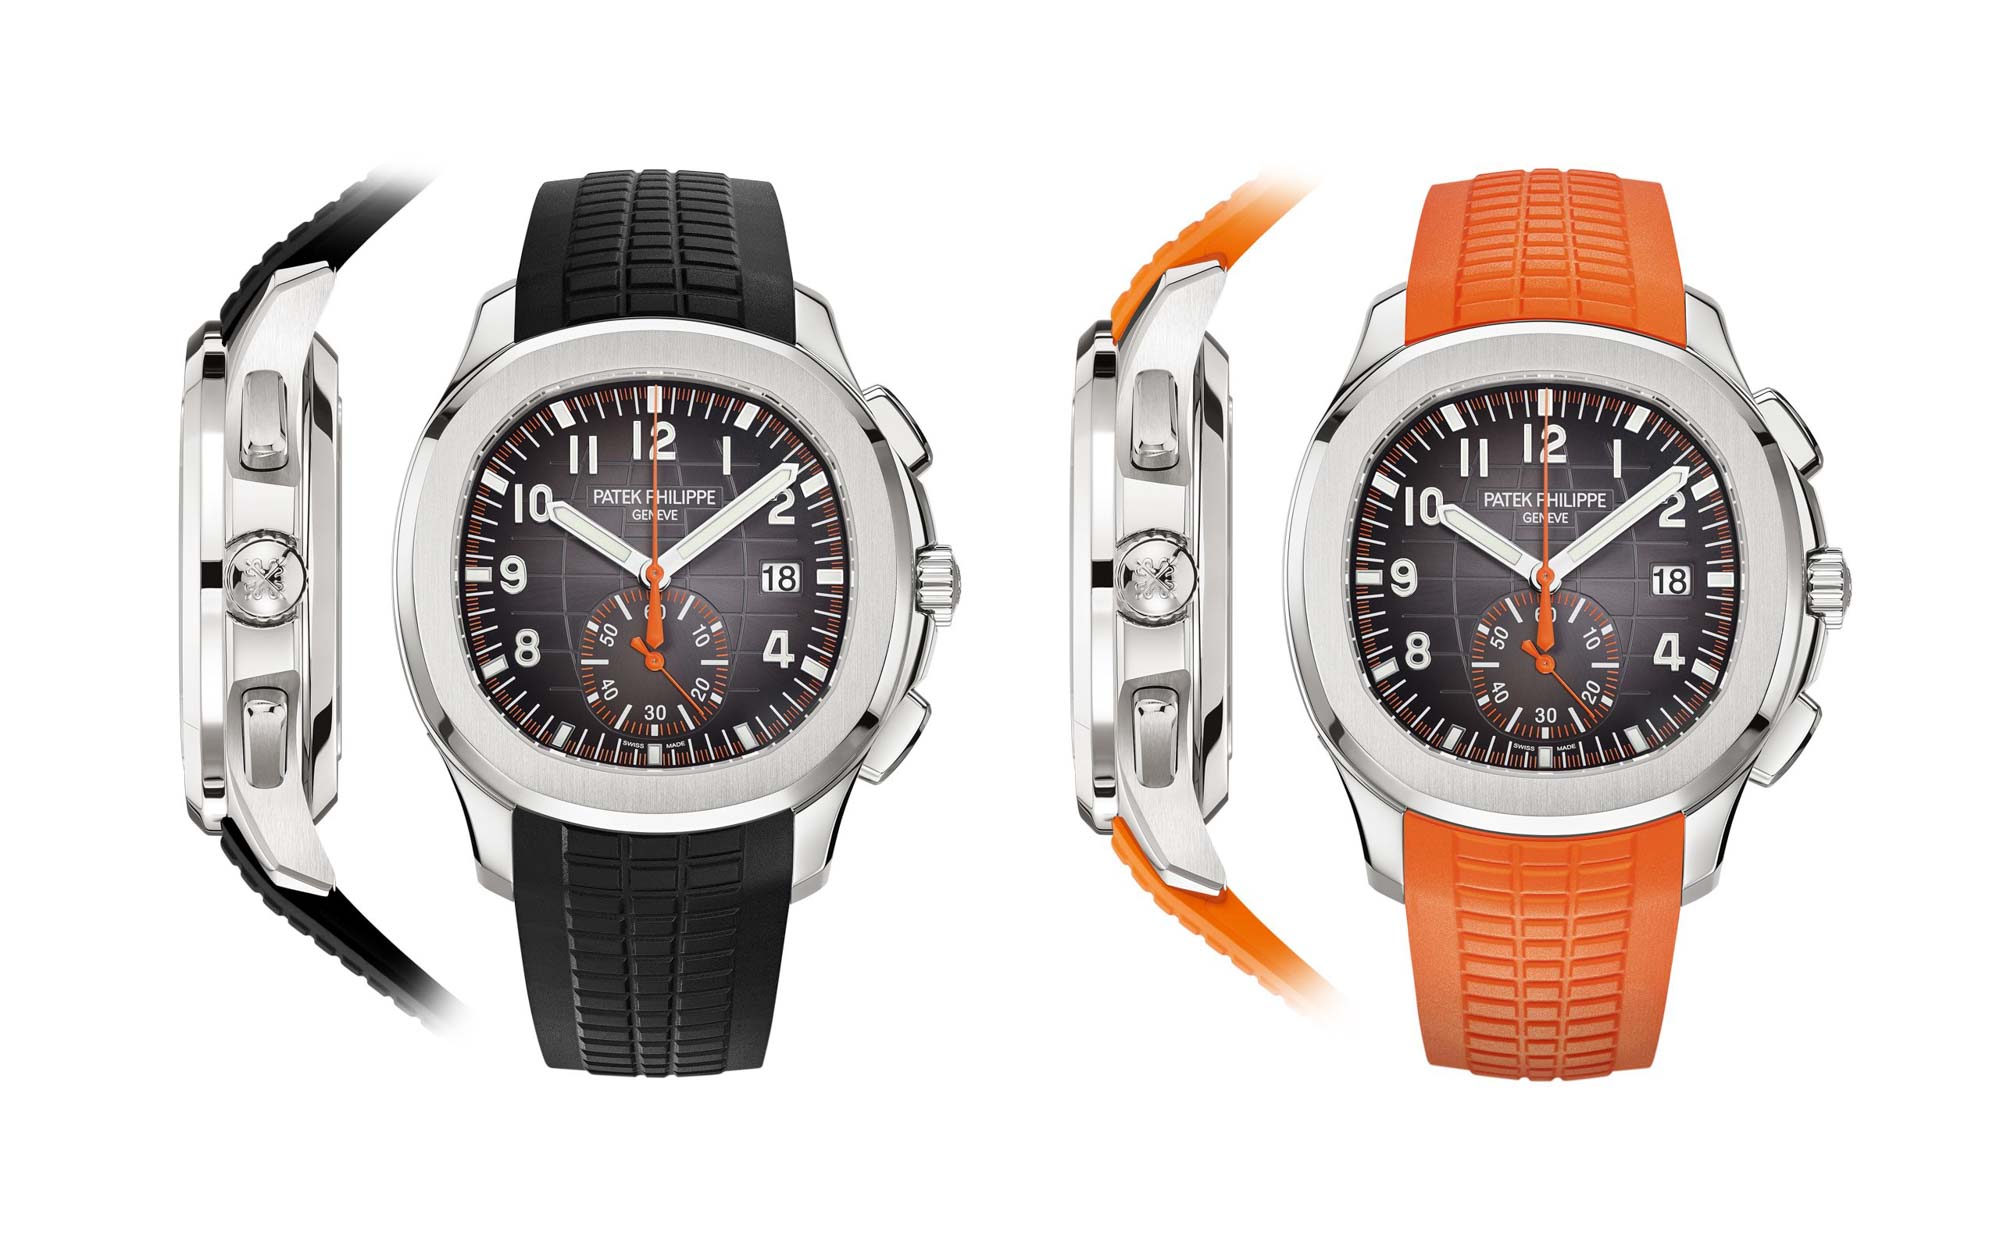 The Aquanaut Flyback Chronograph Ref. 5968A Released In 2018 Is The First Chronograph Introduced In The Aquanaut Collection. It Stands Out With Contrasting Chronograph Displays And Came With Two Interchangeable Straps: One Orange And One Black.